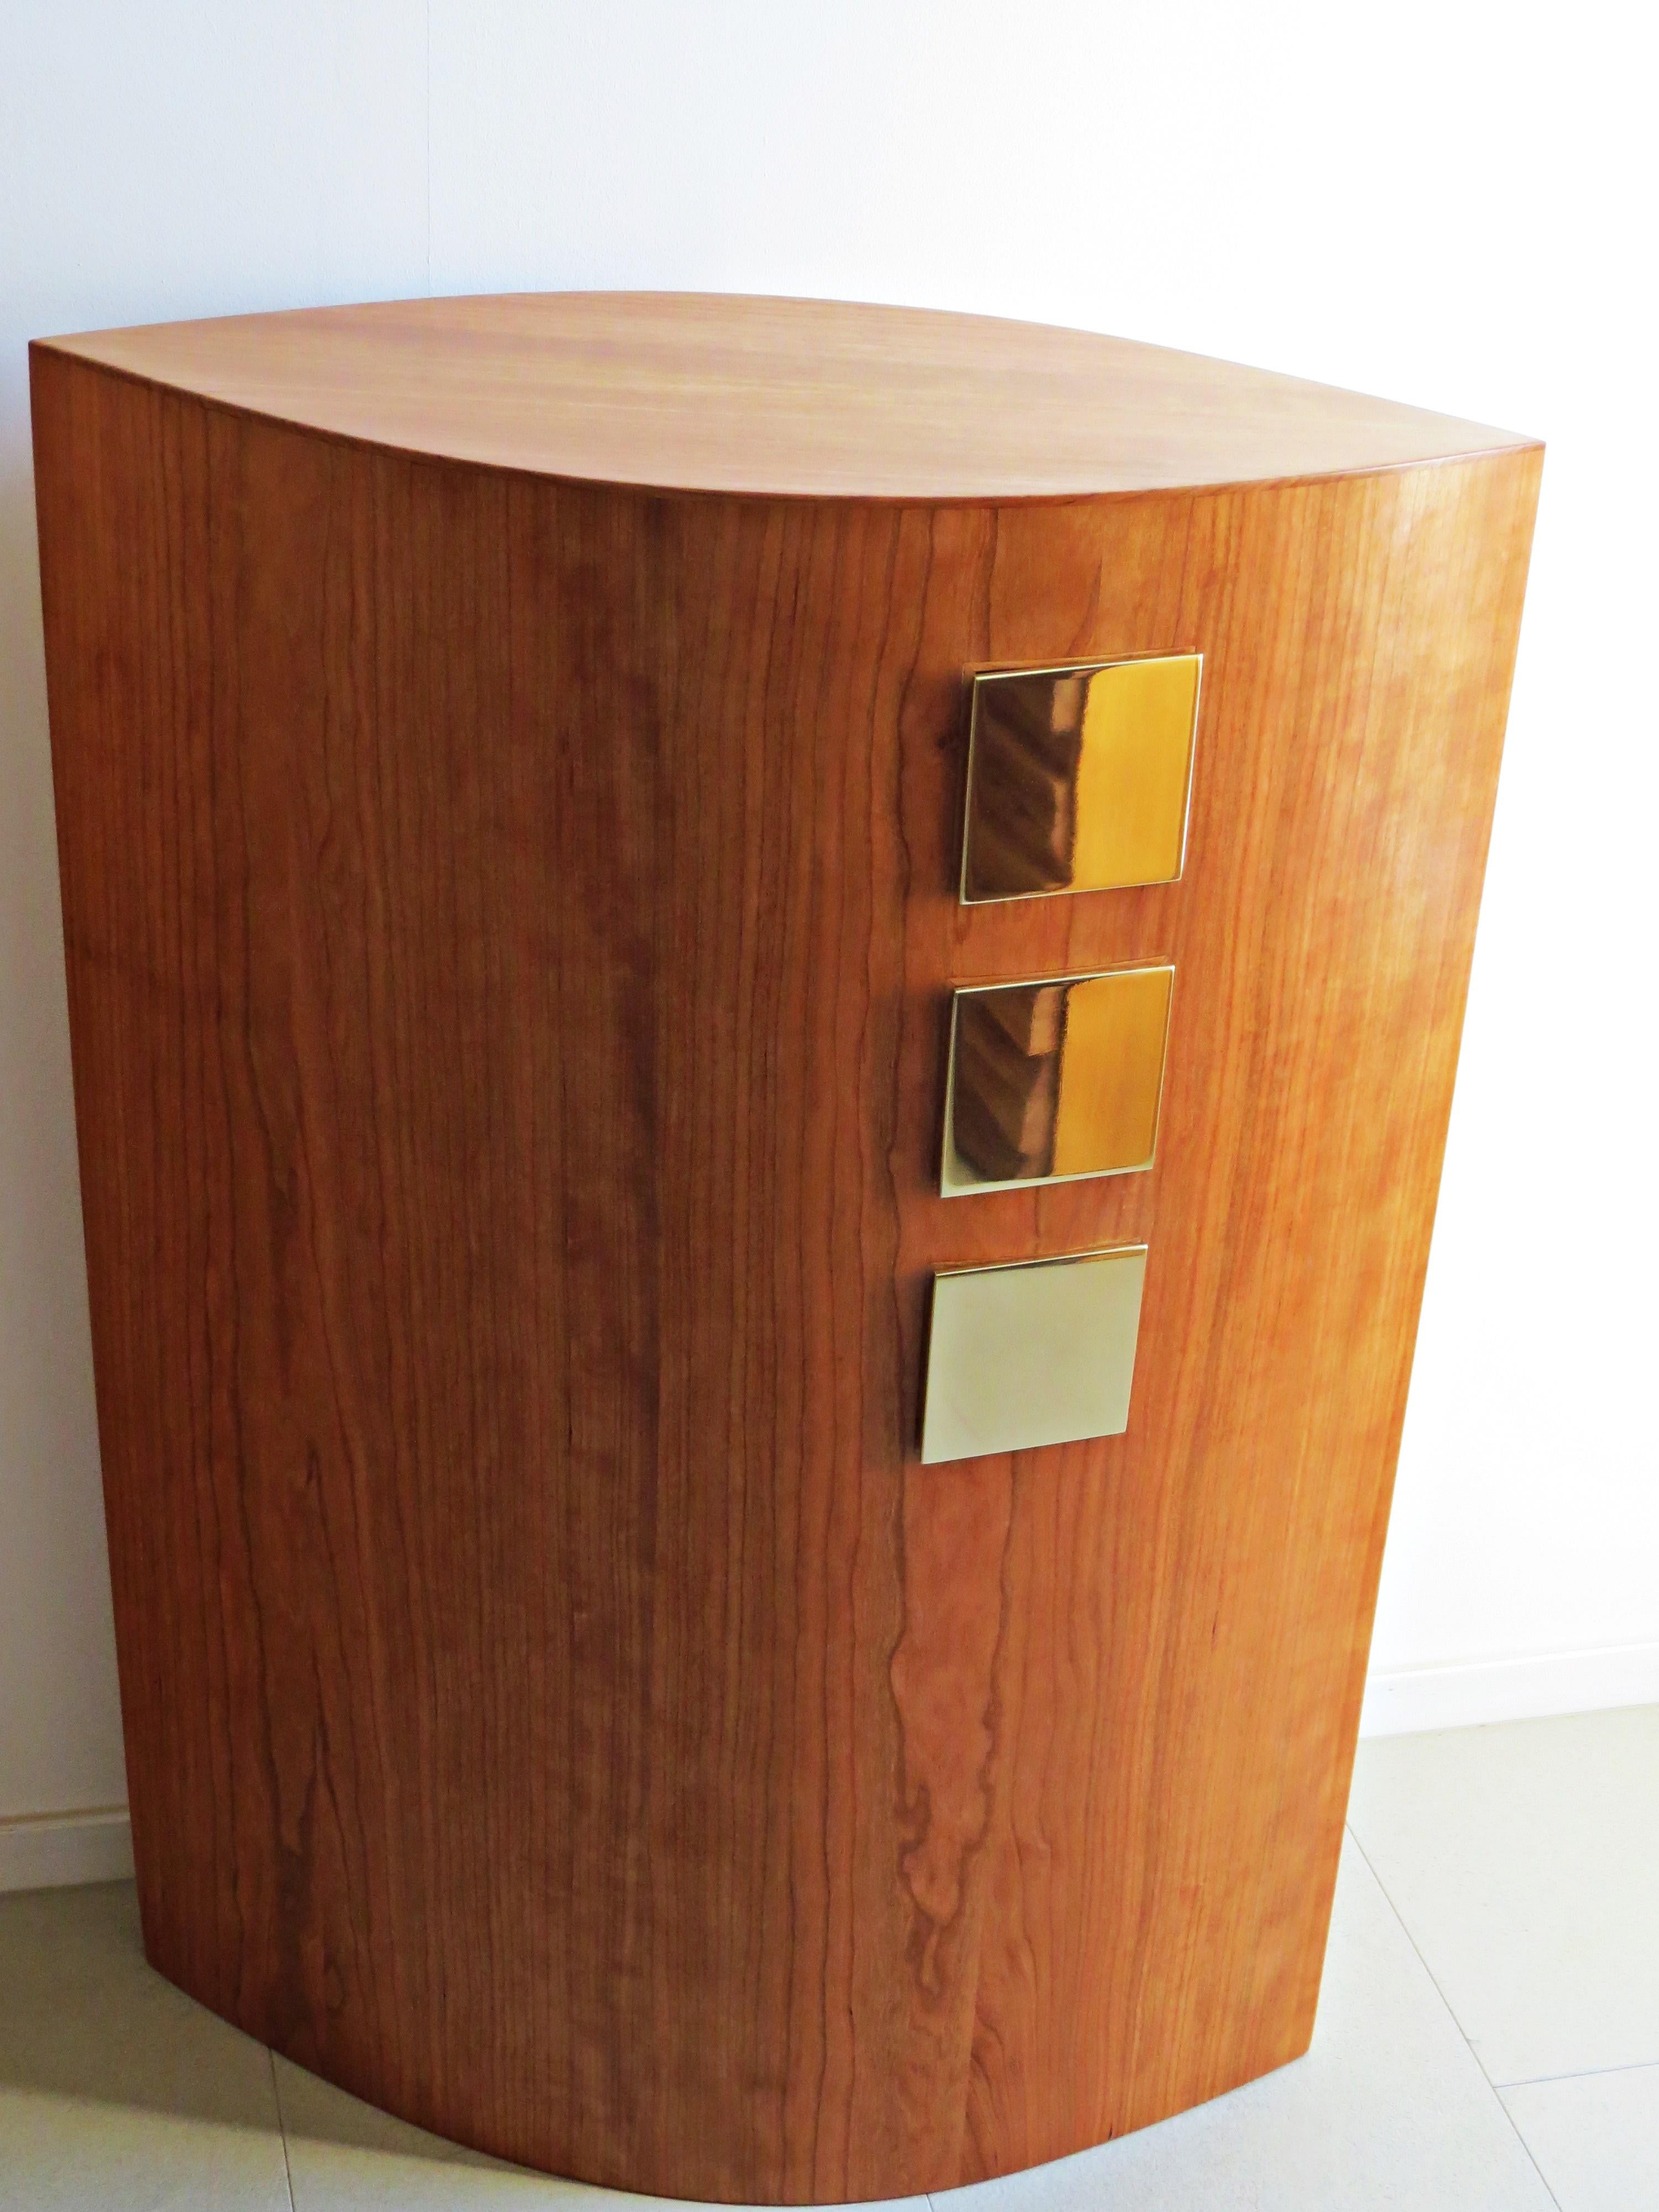 Art Deco Console, Cherry Wood, Brass Drawers, Handmade in Germany For Sale